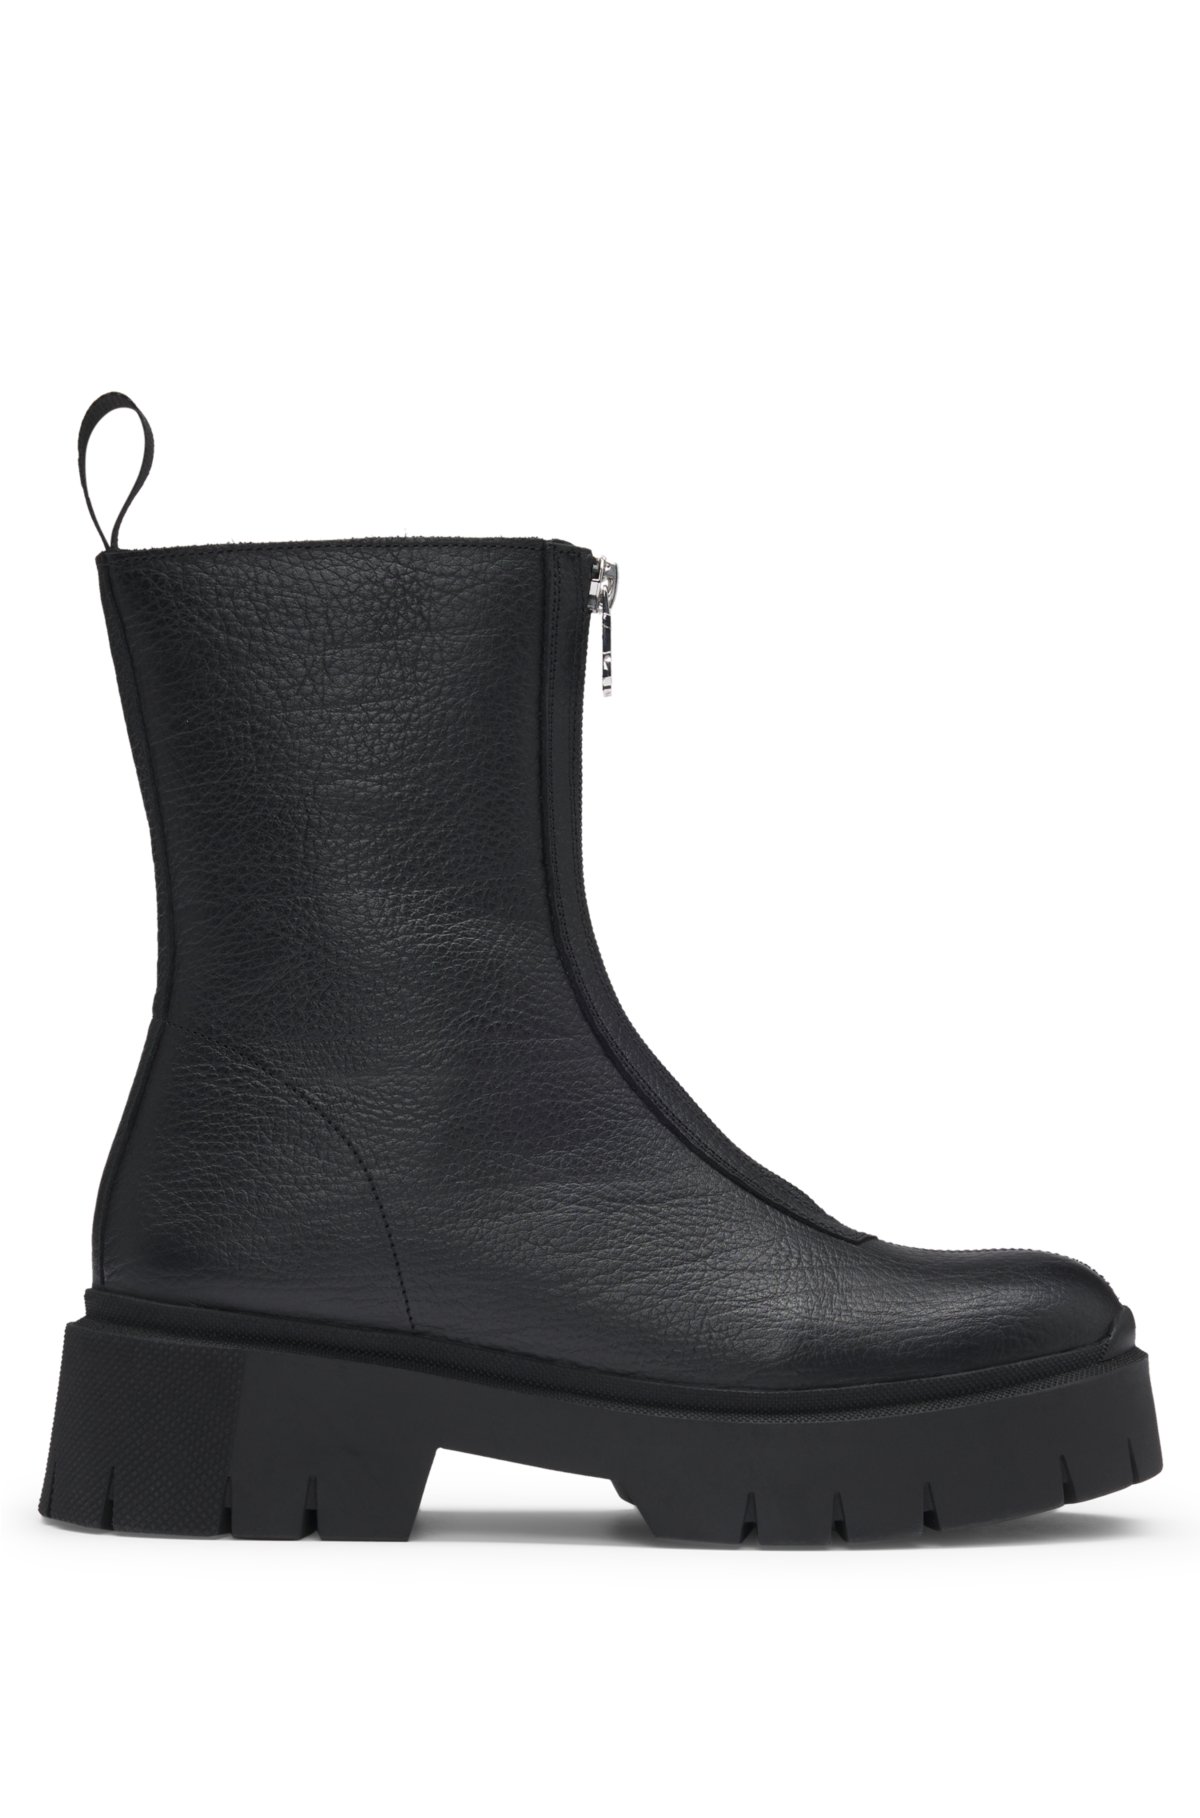 Ankle boots in tumbled leather with front zip, Black